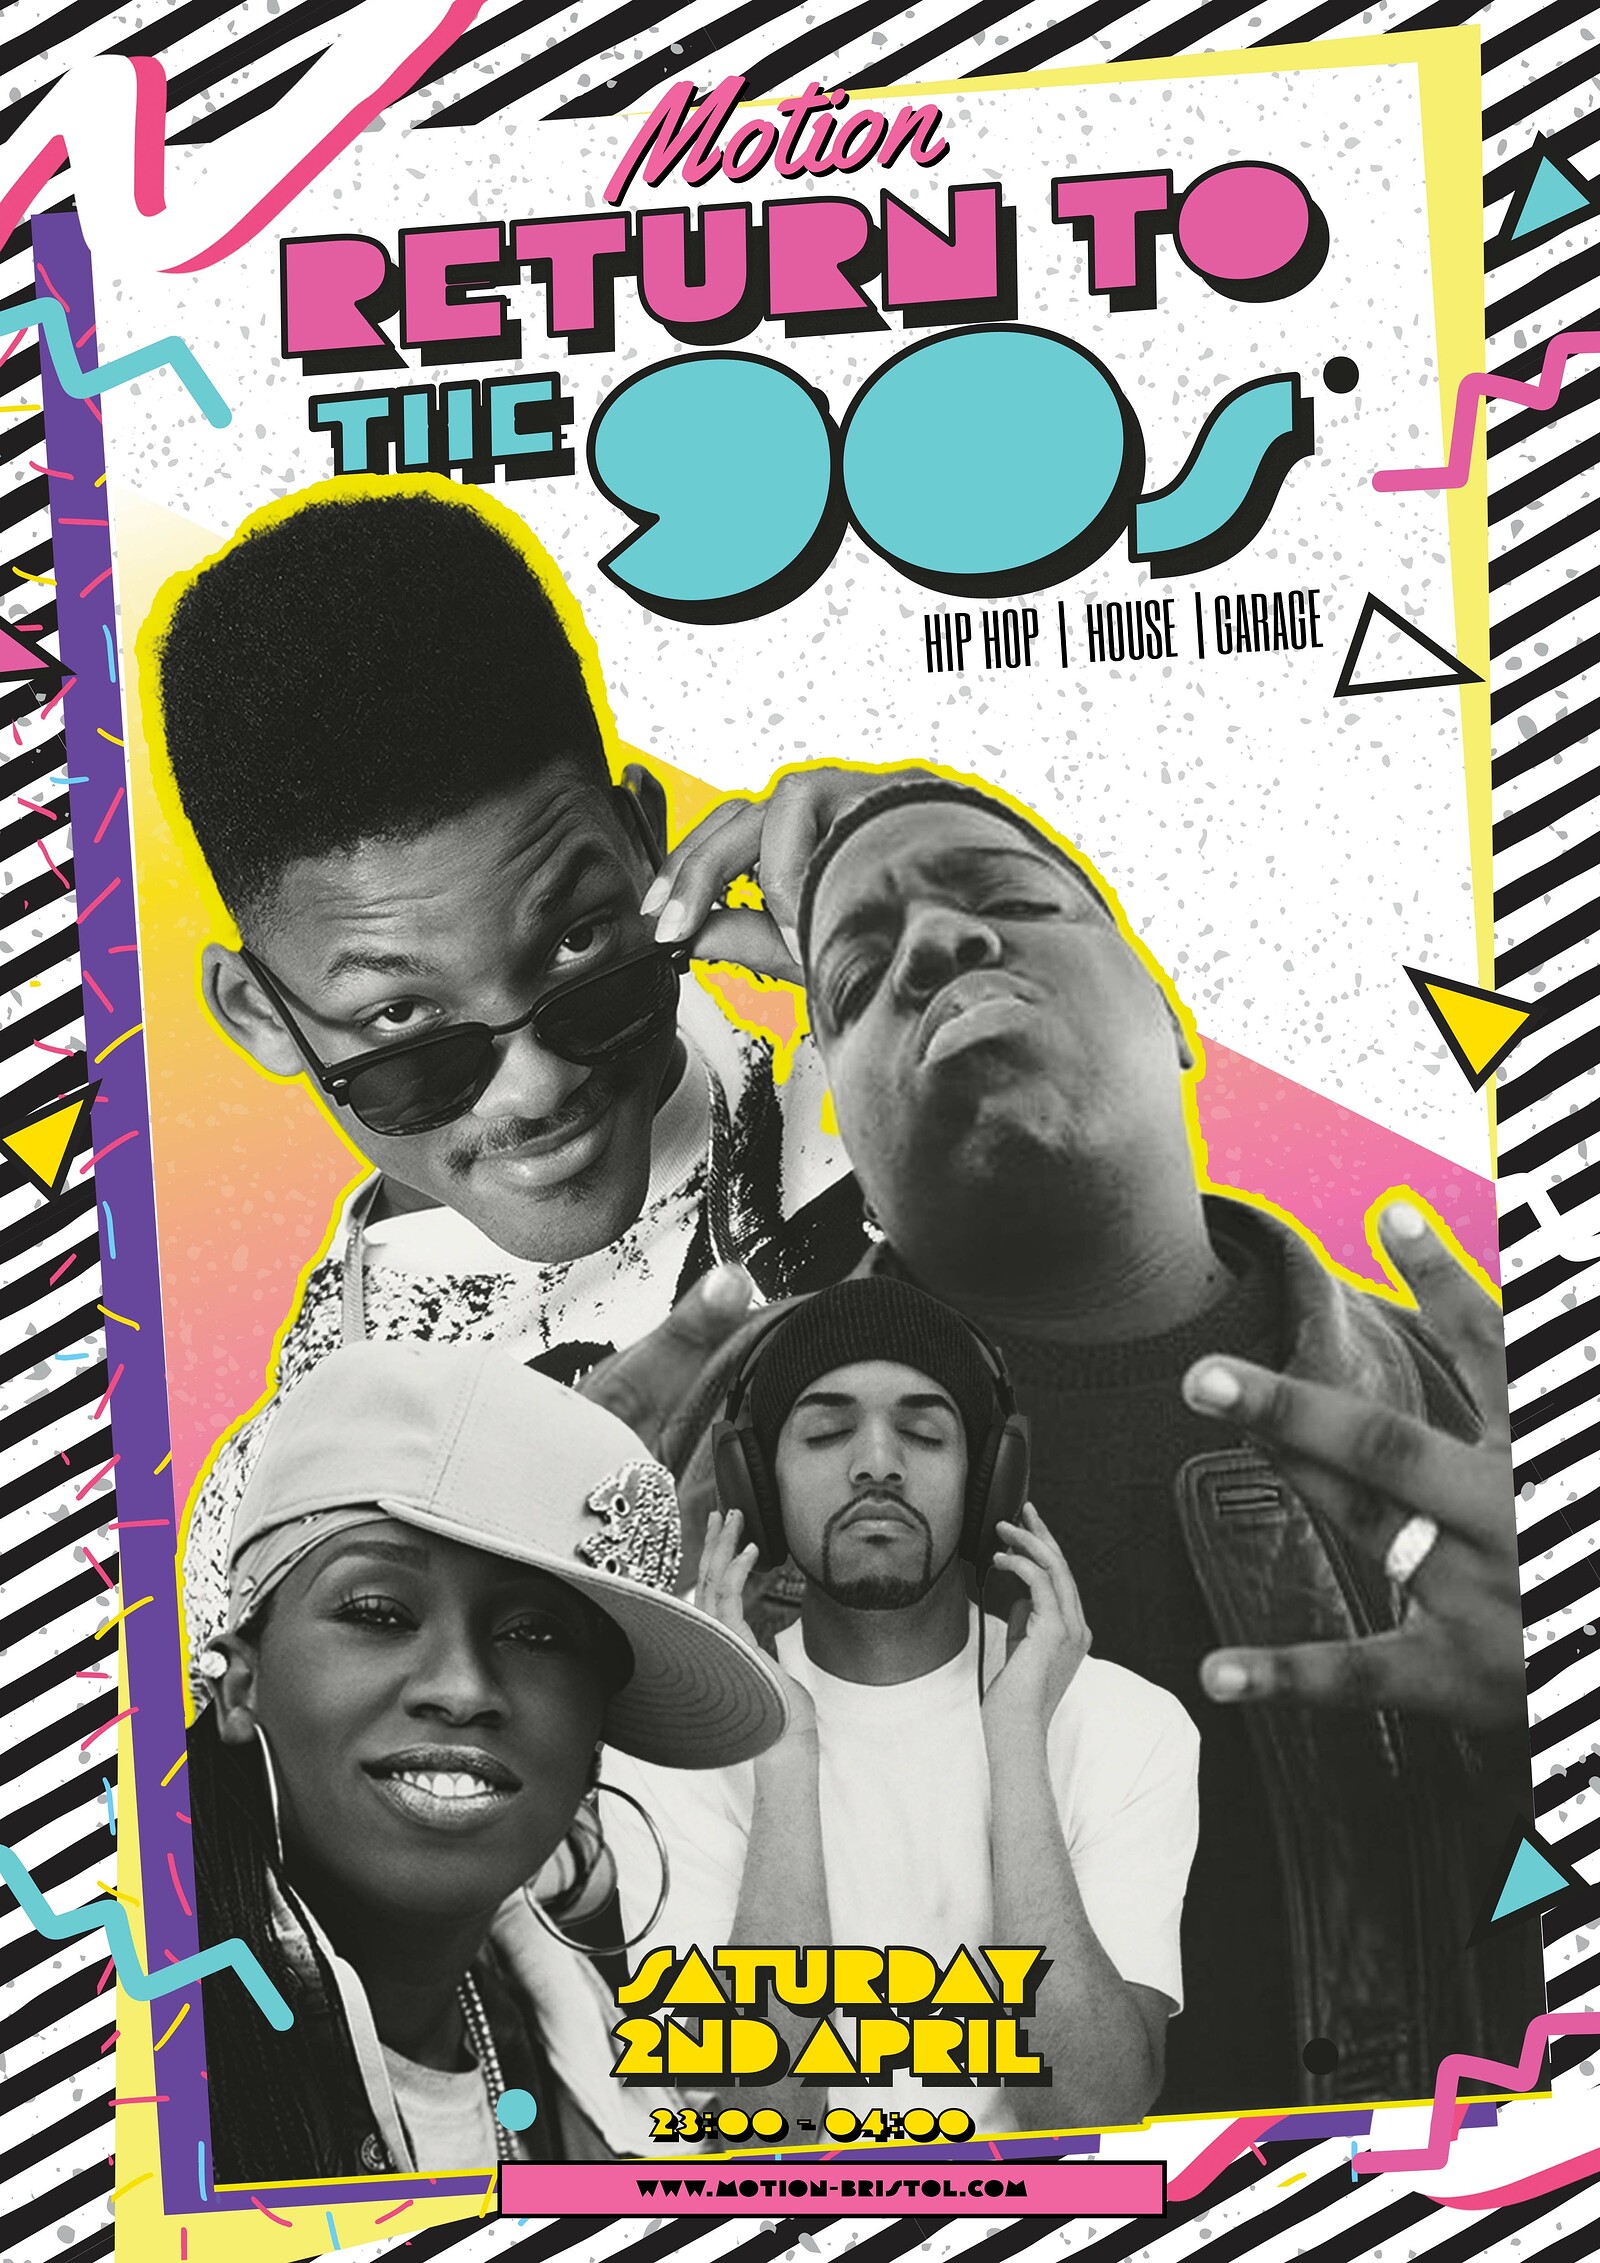 90's House Party: Return to the 90's at Motion